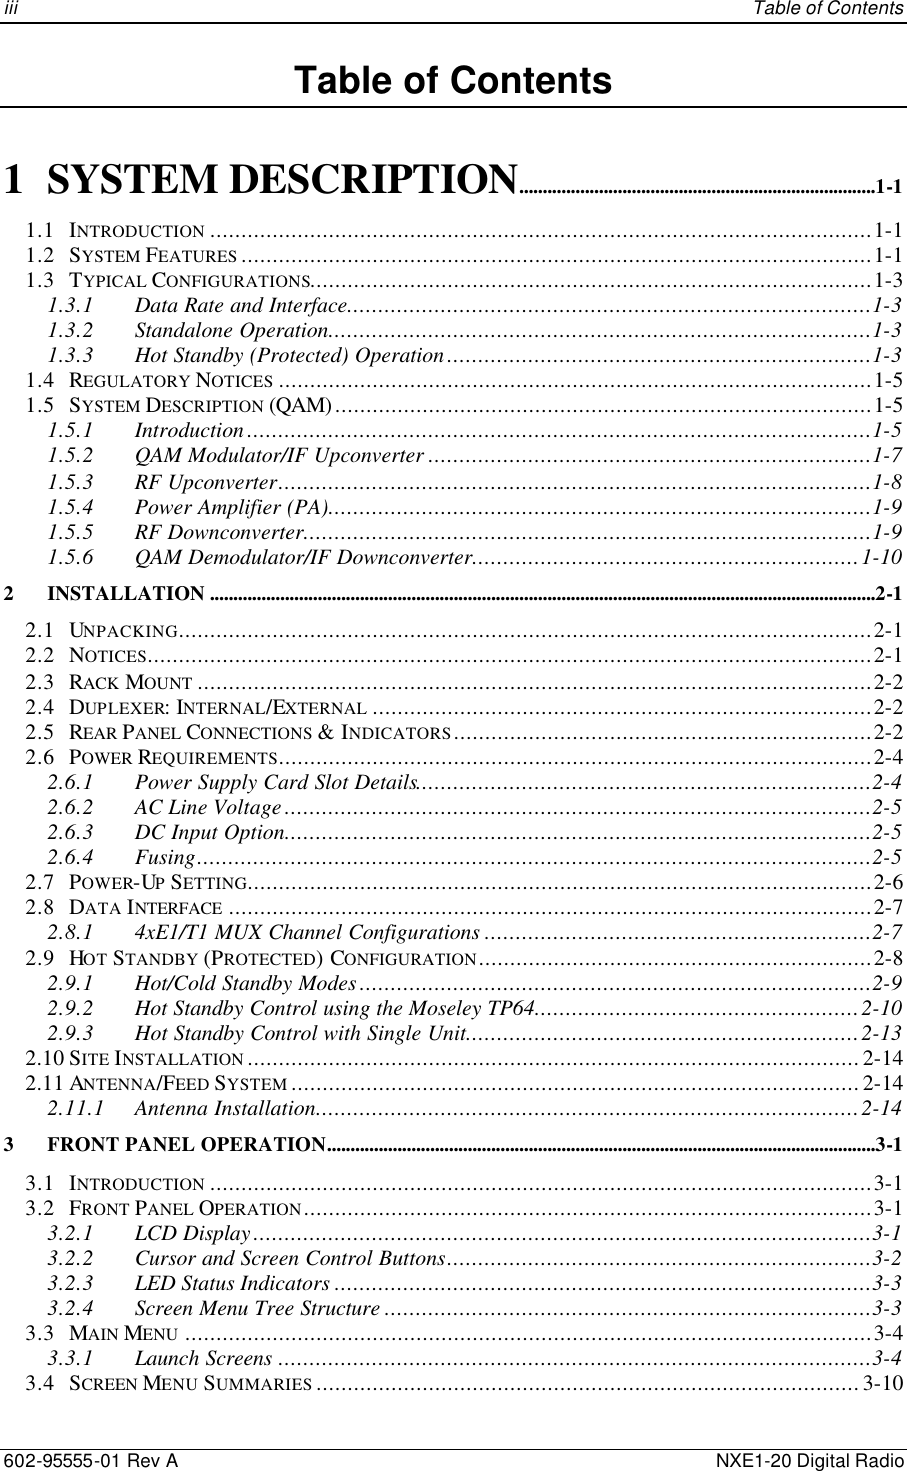 iii    Table of Contents 602-95555-01 Rev A    NXE1-20 Digital Radio Table of Contents  1 SYSTEM DESCRIPTION............................................................................1-1 1.1 INTRODUCTION ..........................................................................................................1-1 1.2 SYSTEM FEATURES .....................................................................................................1-1 1.3 TYPICAL CONFIGURATIONS..........................................................................................1-3 1.3.1 Data Rate and Interface....................................................................................1-3 1.3.2 Standalone Operation.......................................................................................1-3 1.3.3 Hot Standby (Protected) Operation....................................................................1-3 1.4 REGULATORY NOTICES ...............................................................................................1-5 1.5 SYSTEM DESCRIPTION (QAM)......................................................................................1-5 1.5.1 Introduction....................................................................................................1-5 1.5.2 QAM Modulator/IF Upconverter .......................................................................1-7 1.5.3 RF Upconverter...............................................................................................1-8 1.5.4 Power Amplifier (PA).......................................................................................1-9 1.5.5 RF Downconverter...........................................................................................1-9 1.5.6 QAM Demodulator/IF Downconverter..............................................................1-10 2 INSTALLATION ..............................................................................................................................................2-1 2.1 UNPACKING...............................................................................................................2-1 2.2 NOTICES....................................................................................................................2-1 2.3 RACK MOUNT ............................................................................................................2-2 2.4 DUPLEXER: INTERNAL/EXTERNAL ................................................................................2-2 2.5 REAR PANEL CONNECTIONS &amp; INDICATORS...................................................................2-2 2.6 POWER REQUIREMENTS...............................................................................................2-4 2.6.1 Power Supply Card Slot Details.........................................................................2-4 2.6.2 AC Line Voltage..............................................................................................2-5 2.6.3 DC Input Option..............................................................................................2-5 2.6.4 Fusing............................................................................................................2-5 2.7 POWER-UP SETTING....................................................................................................2-6 2.8 DATA INTERFACE .......................................................................................................2-7 2.8.1 4xE1/T1 MUX Channel Configurations ..............................................................2-7 2.9 HOT STANDBY (PROTECTED) CONFIGURATION...............................................................2-8 2.9.1 Hot/Cold Standby Modes..................................................................................2-9 2.9.2 Hot Standby Control using the Moseley TP64....................................................2-10 2.9.3 Hot Standby Control with Single Unit...............................................................2-13 2.10 SITE INSTALLATION ..................................................................................................2-14 2.11 ANTENNA/FEED SYSTEM ...........................................................................................2-14 2.11.1 Antenna Installation.......................................................................................2-14 3 FRONT PANEL OPERATION.....................................................................................................................3-1 3.1 INTRODUCTION ..........................................................................................................3-1 3.2 FRONT PANEL OPERATION...........................................................................................3-1 3.2.1 LCD Display...................................................................................................3-1 3.2.2 Cursor and Screen Control Buttons....................................................................3-2 3.2.3 LED Status Indicators ......................................................................................3-3 3.2.4 Screen Menu Tree Structure ..............................................................................3-3 3.3 MAIN MENU ..............................................................................................................3-4 3.3.1 Launch Screens ...............................................................................................3-4 3.4 SCREEN MENU SUMMARIES .......................................................................................3-10 